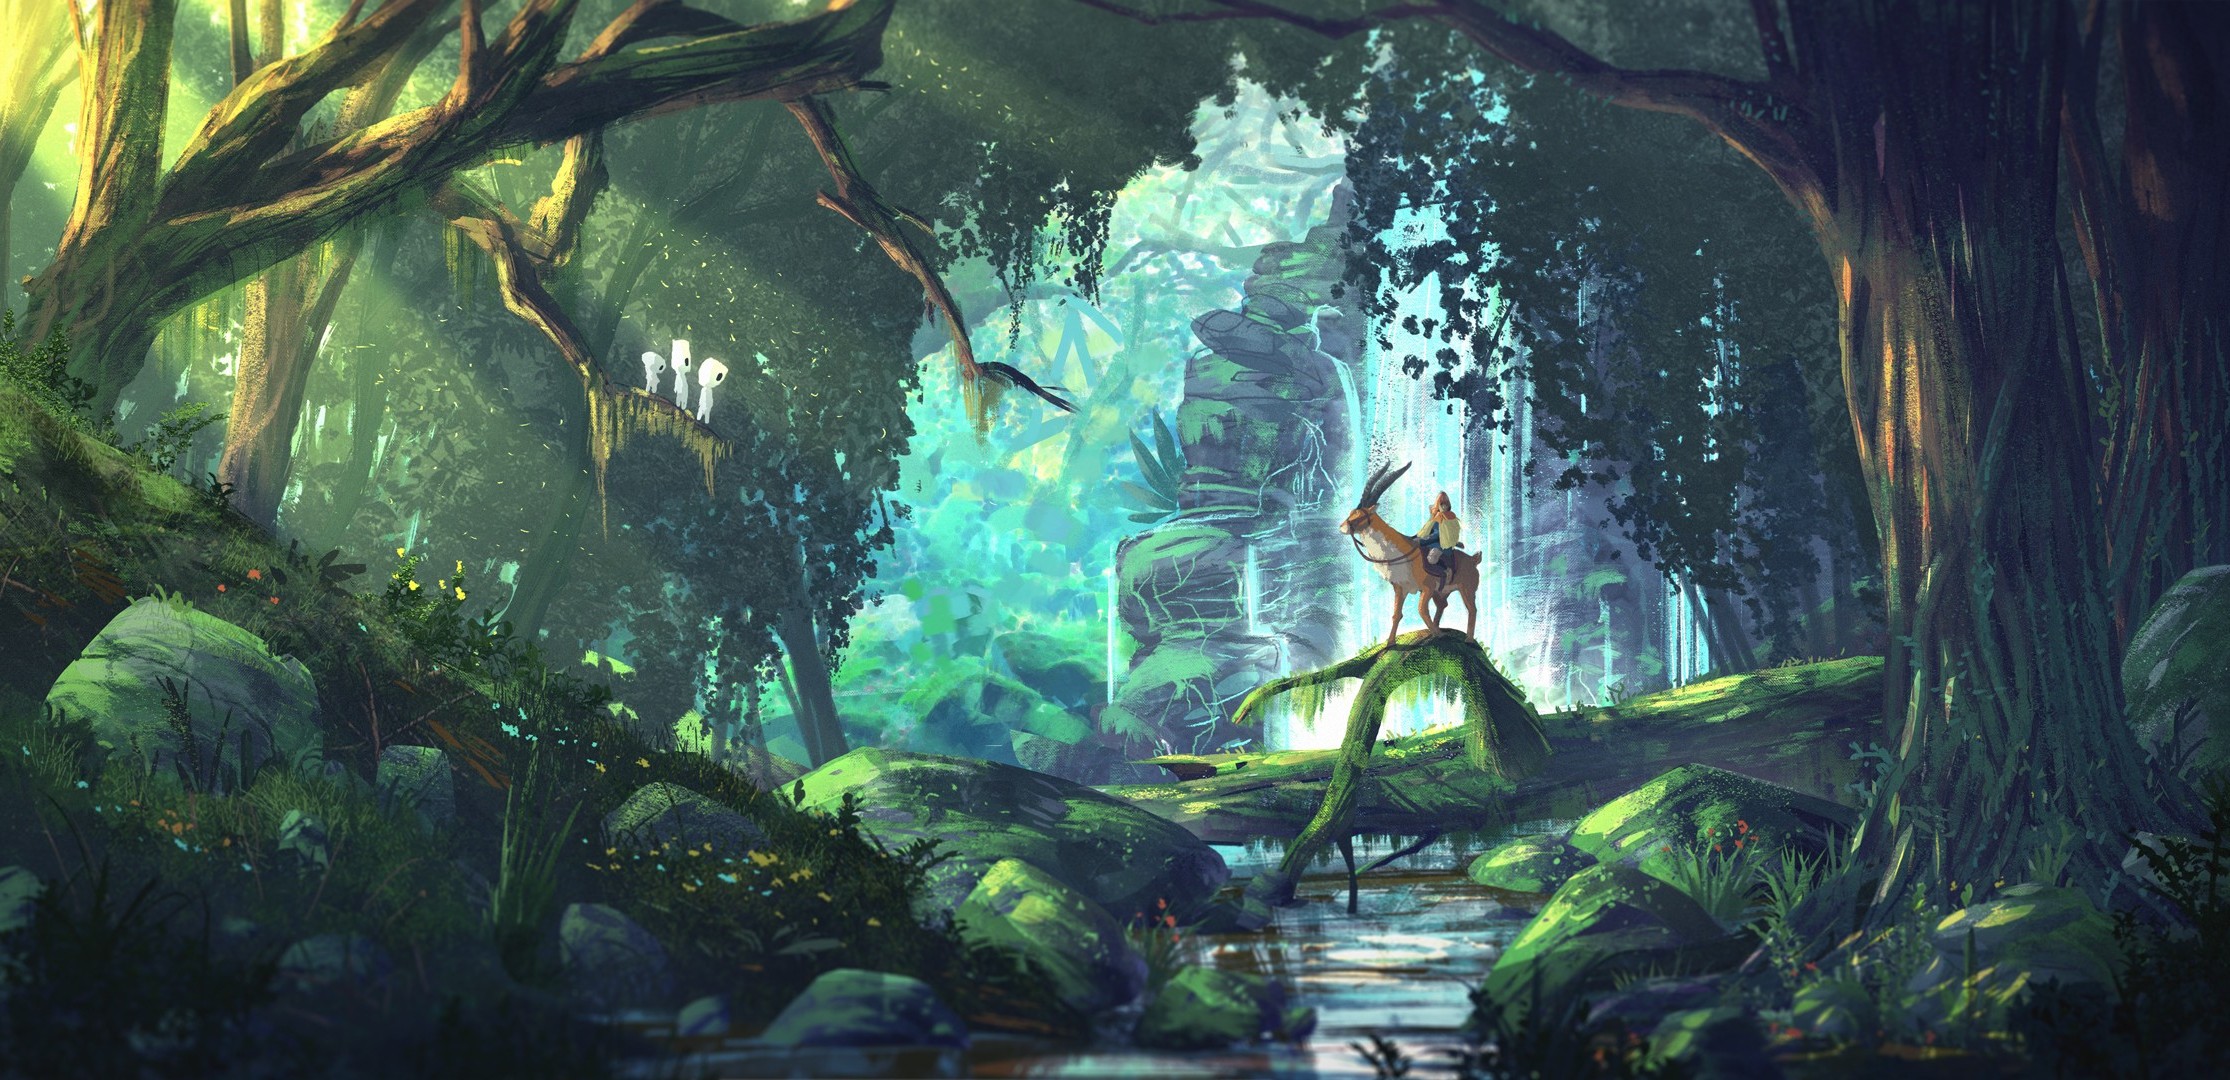 Free download Anime forest wallpaper Anime wallpapers 28742 [1920x1080